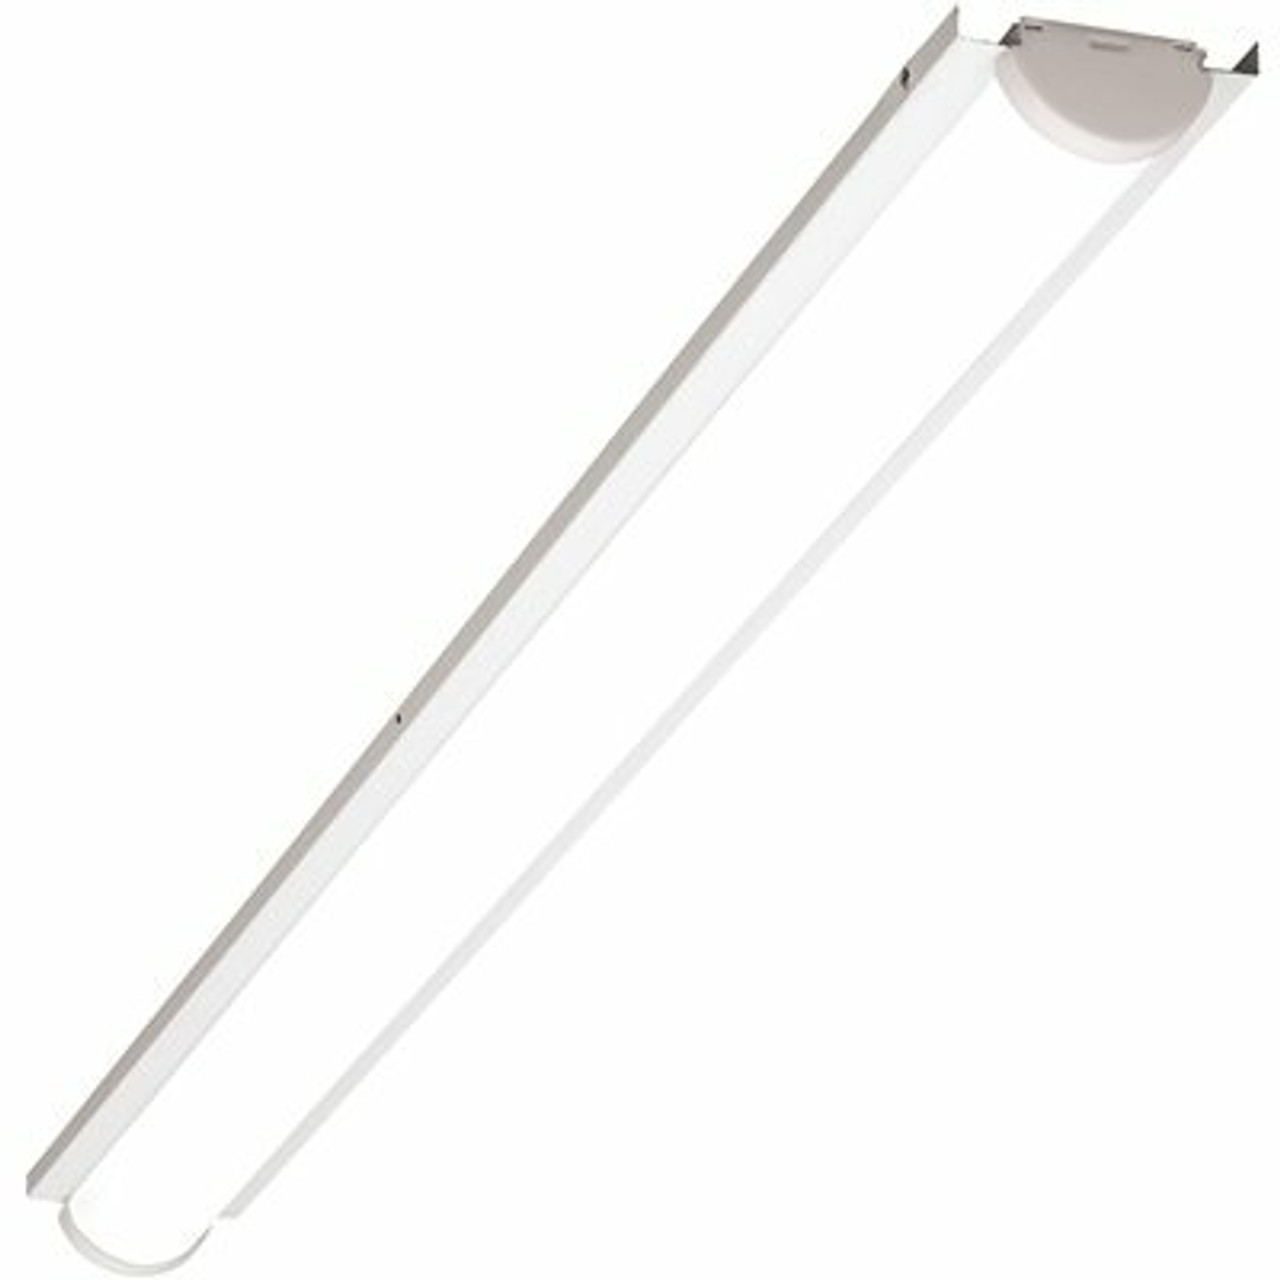 Lsrk 4 Ft. 64-Watt Equivalent Integrated Led White Retrofit Kit For Linear Strip, 40K, Frosted Acrylic Lens Included - 306701734